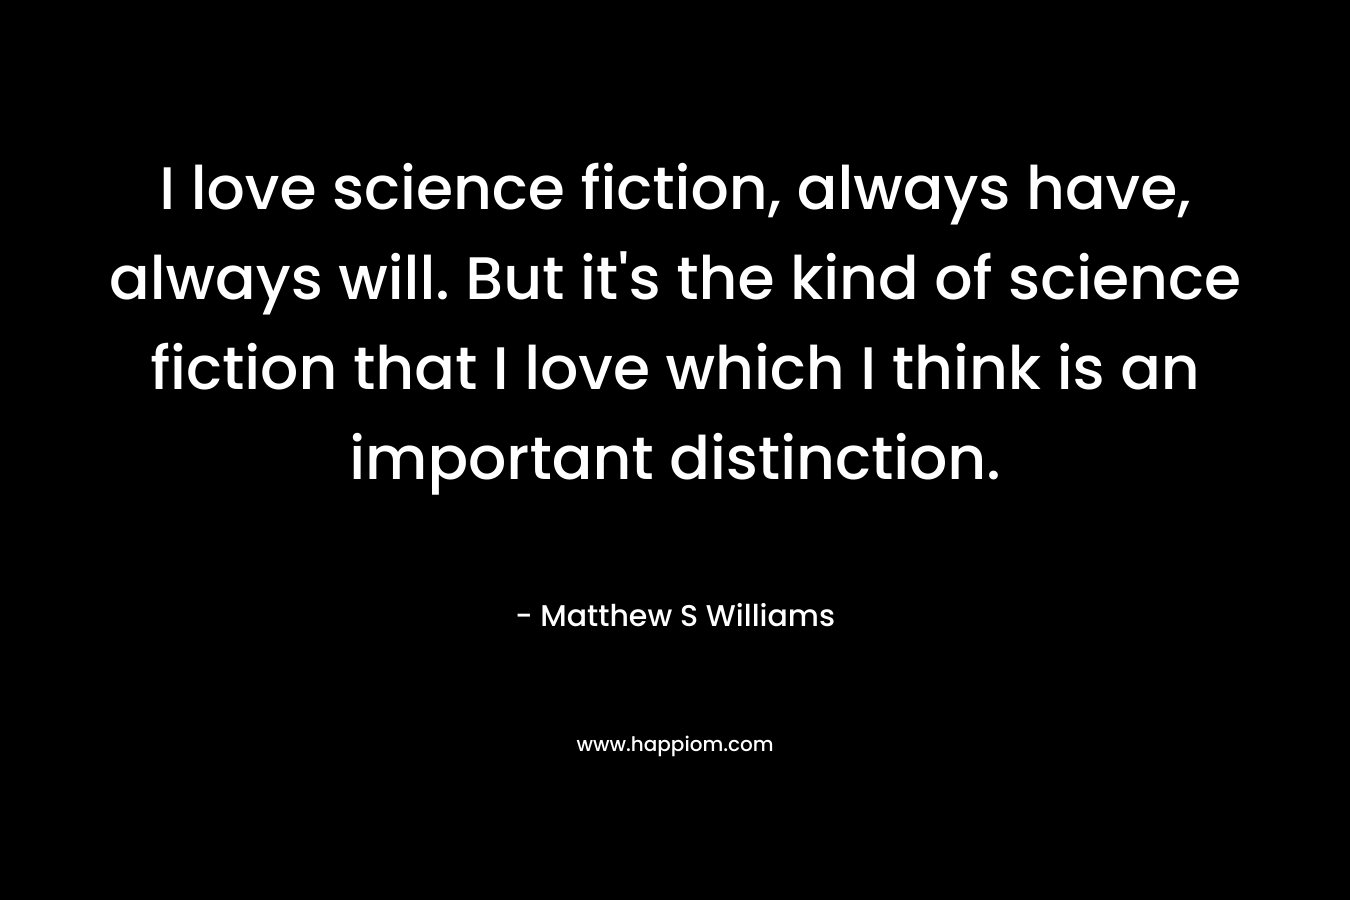 I love science fiction, always have, always will. But it's the kind of science fiction that I love which I think is an important distinction.